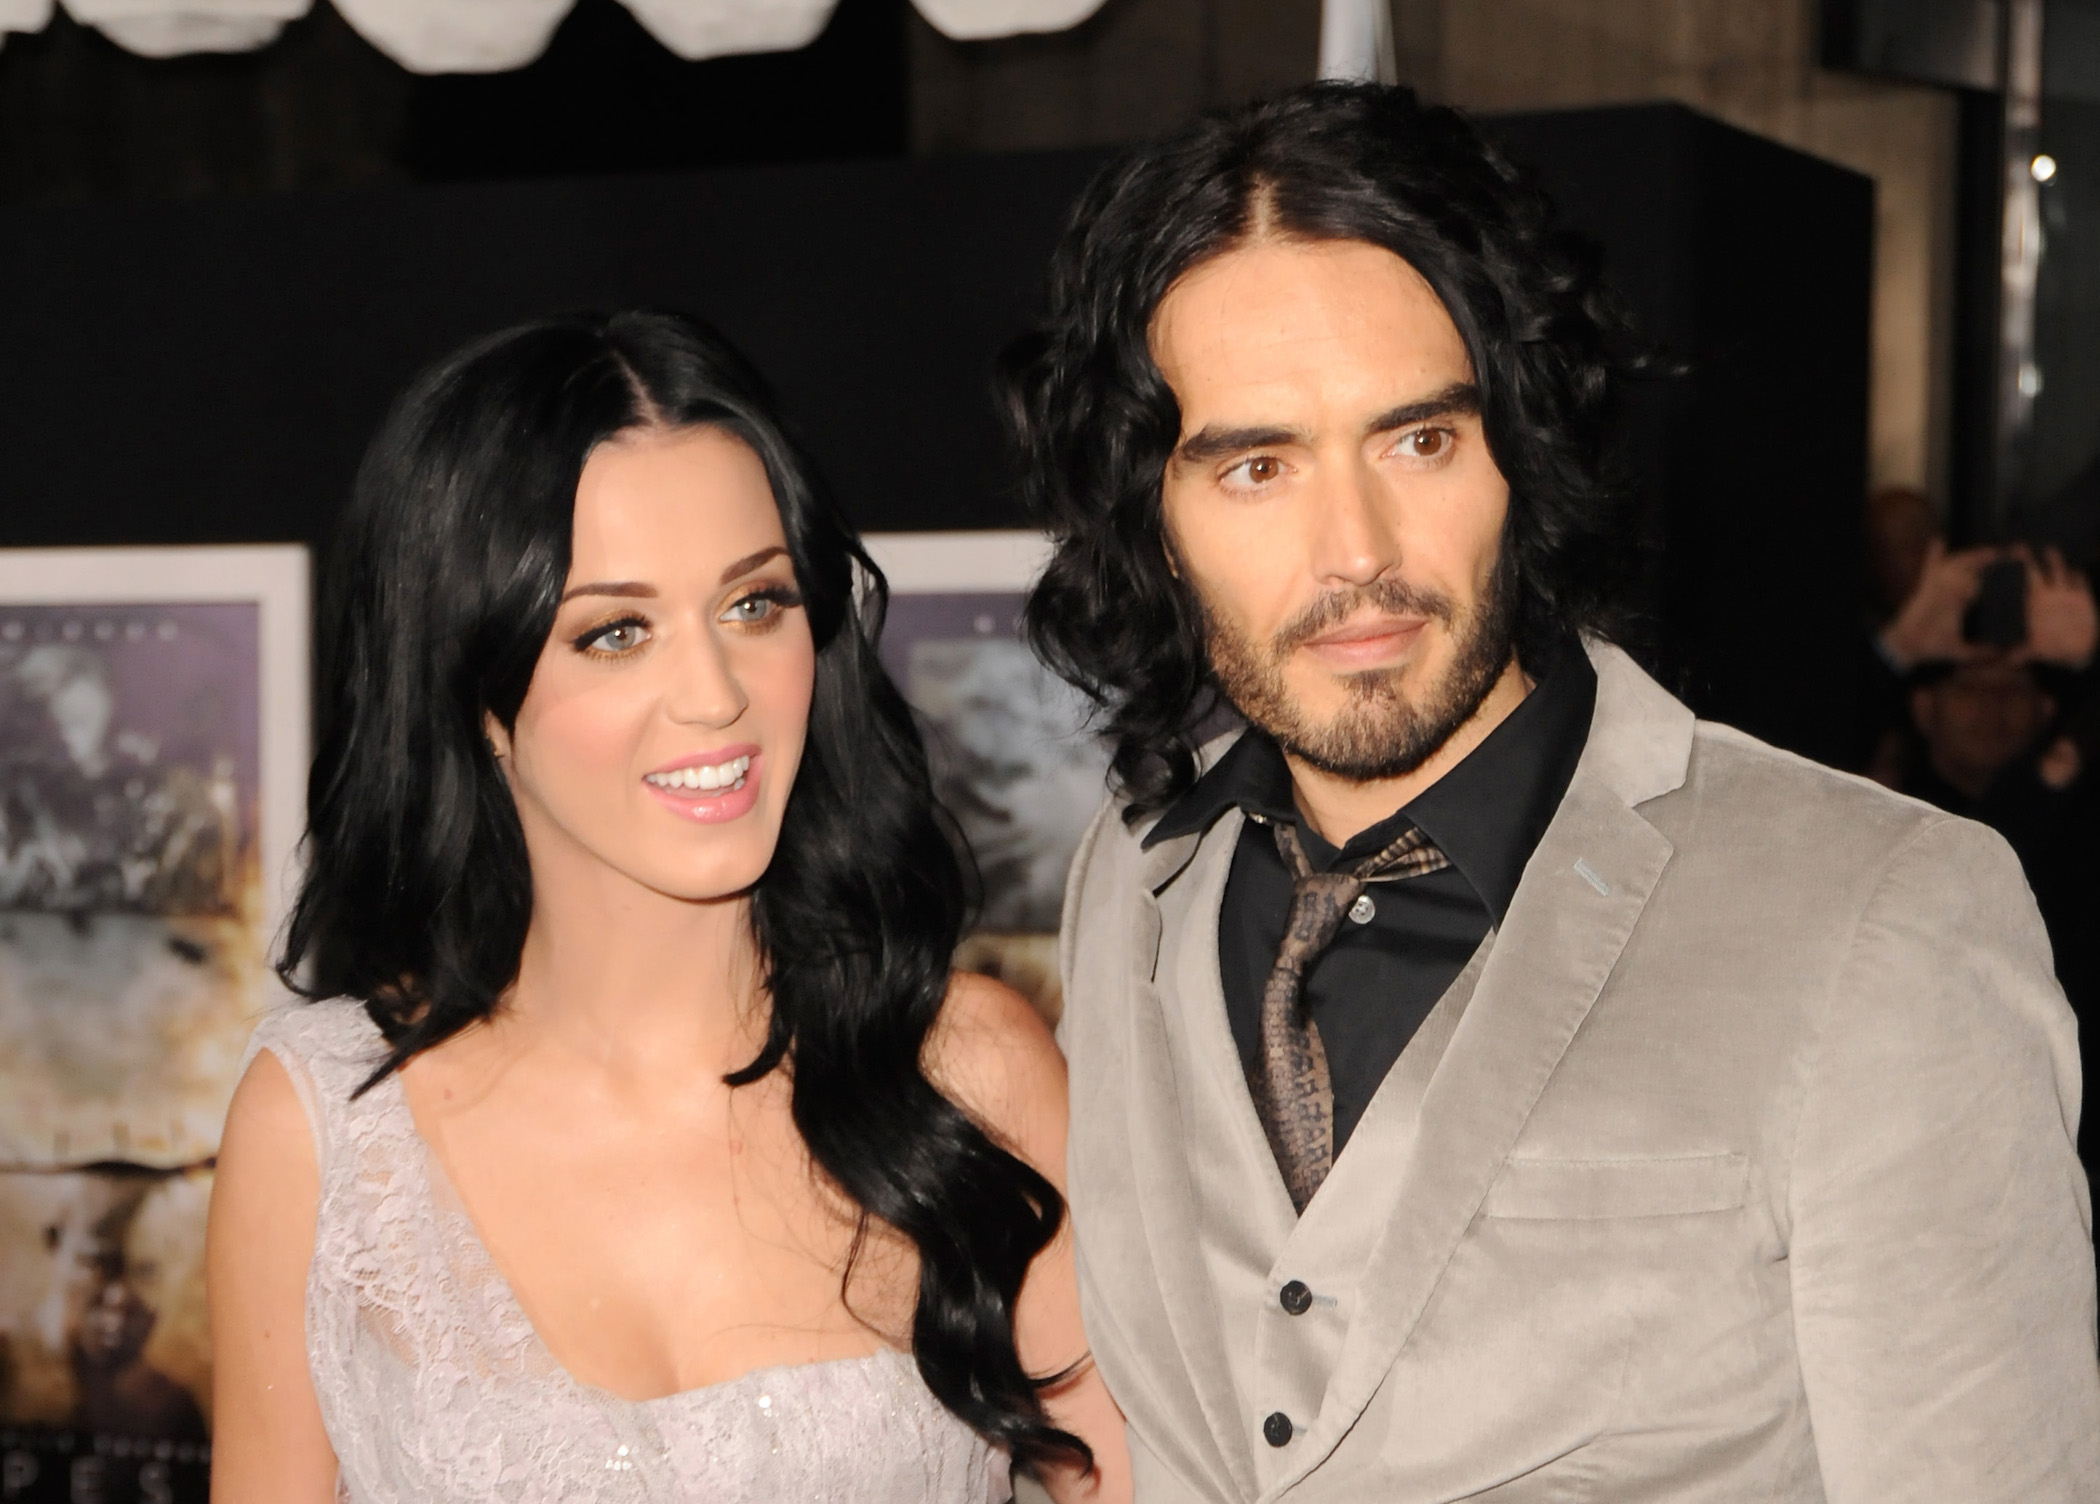 Katy Perry and comedian Russell Brand arrive at the Los Angeles premiere of 'The Tempest' 